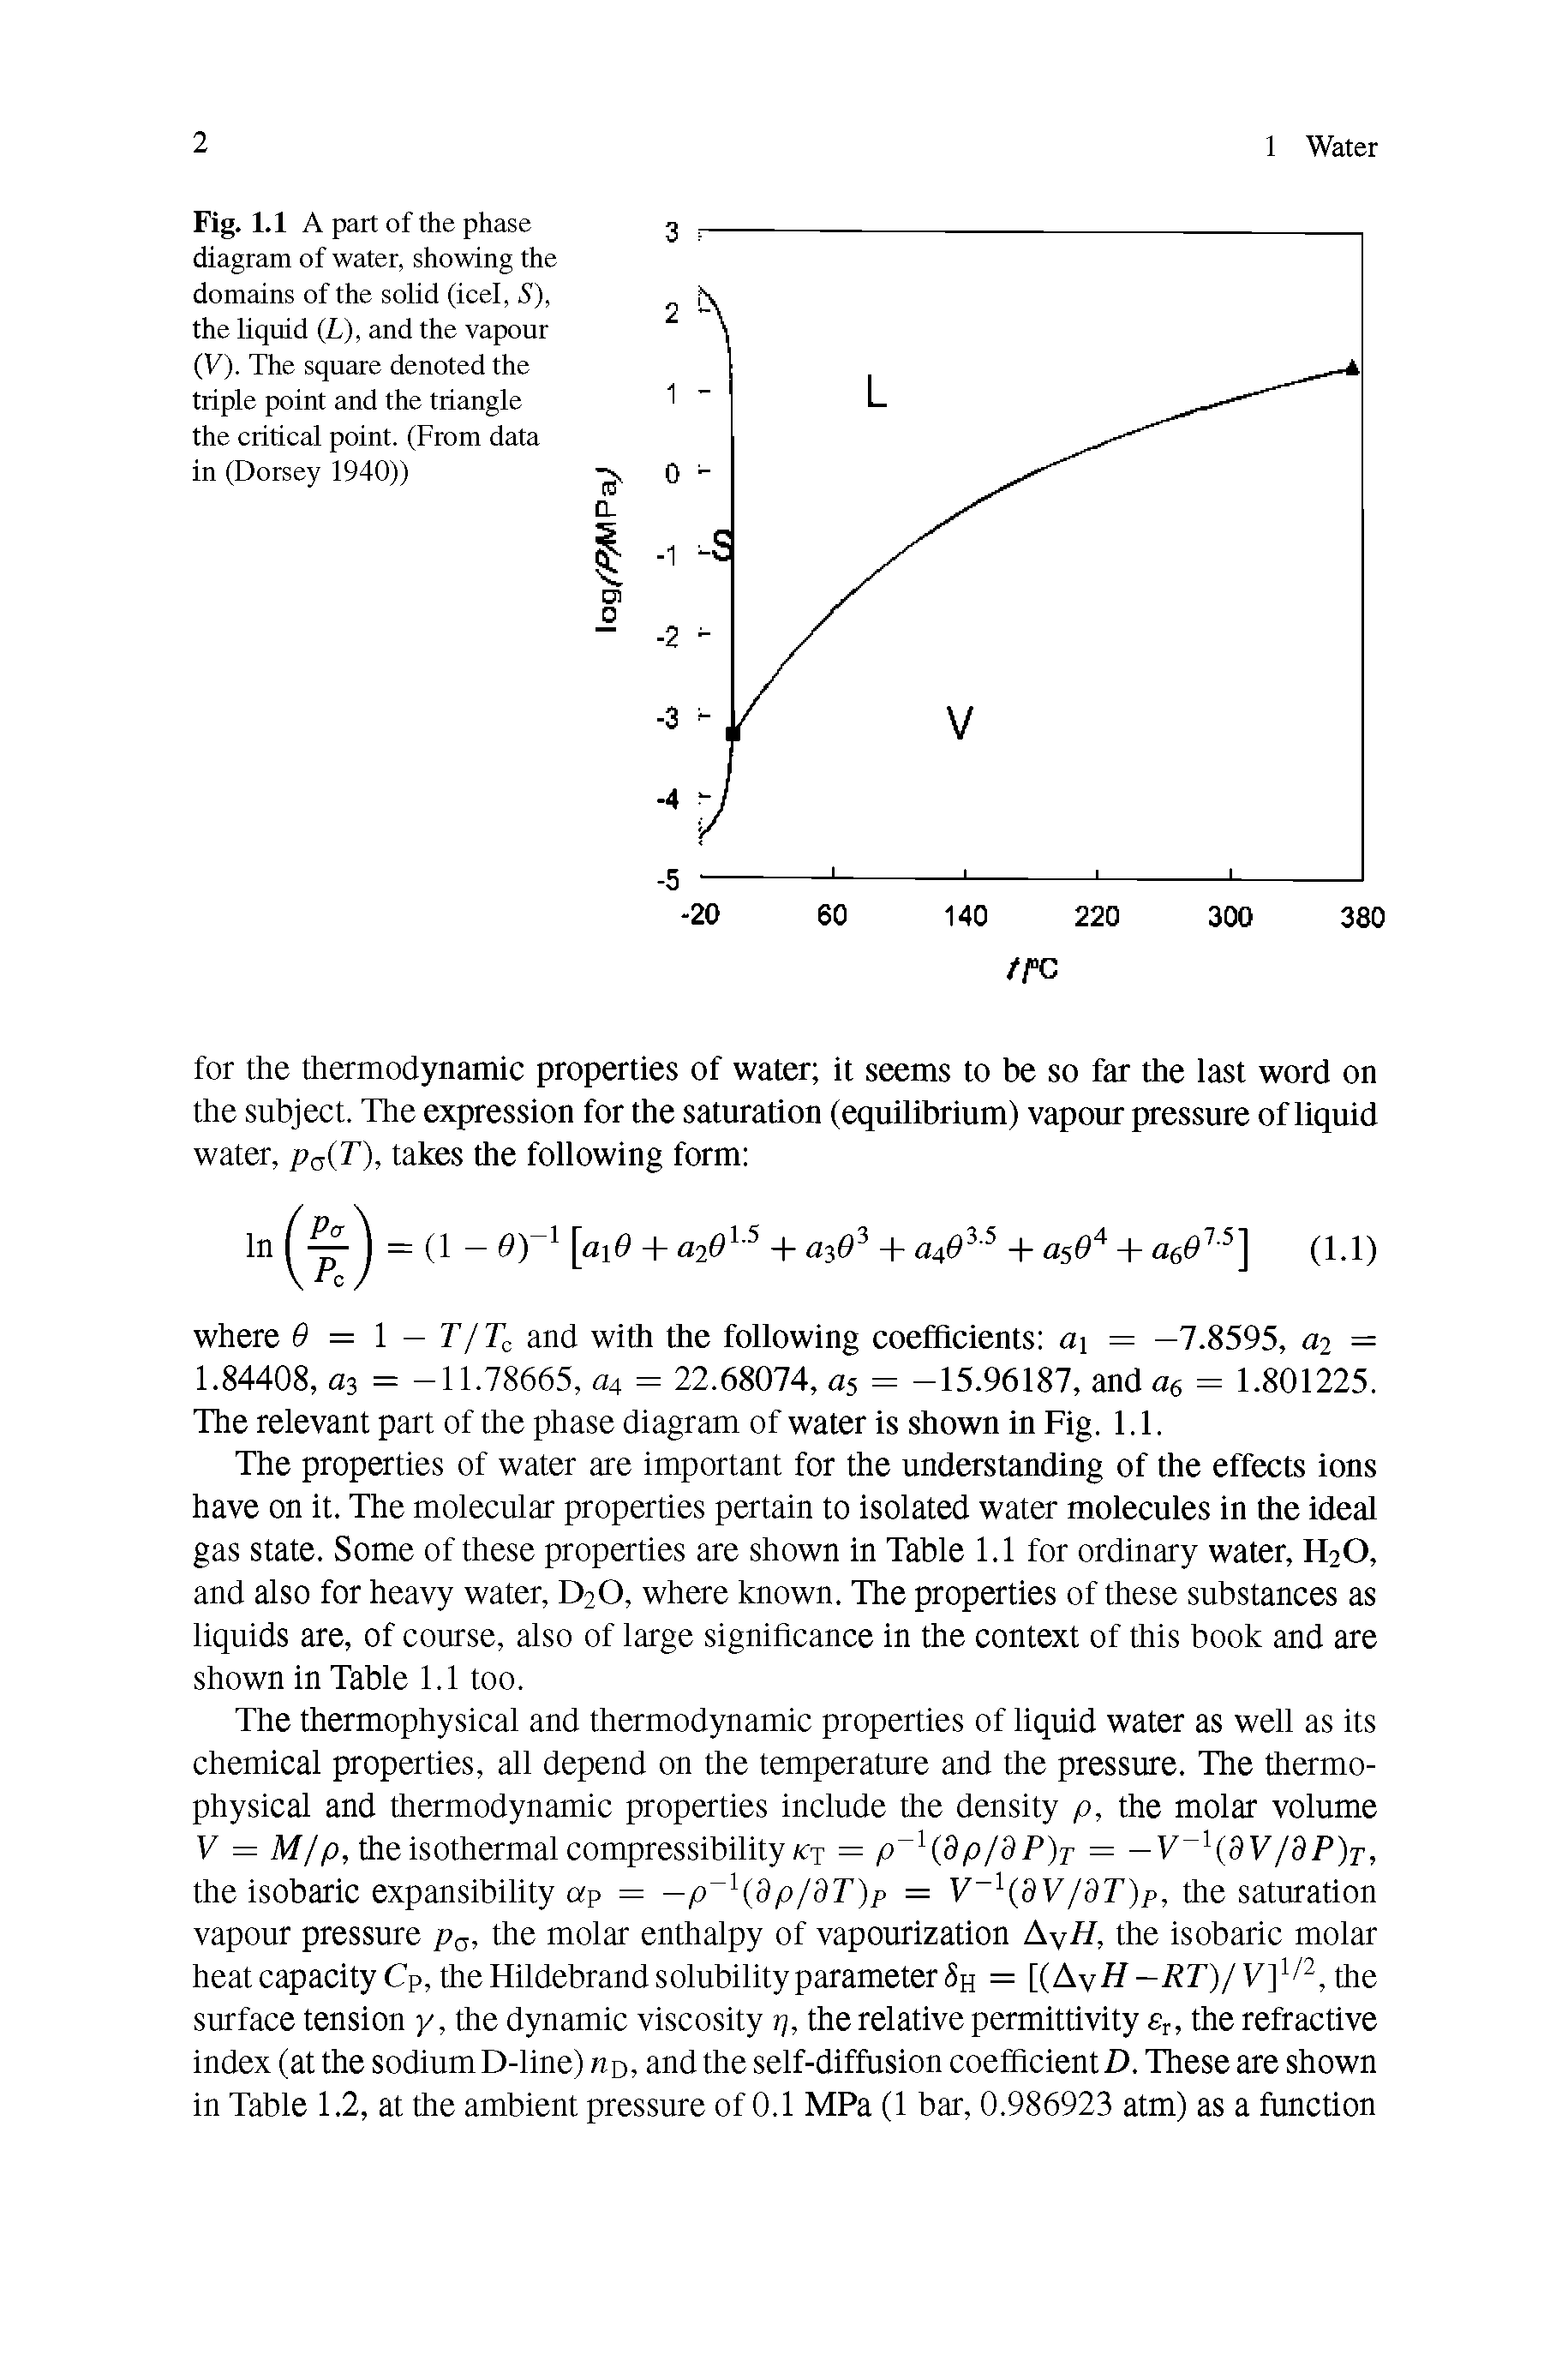 Fig. 1.1 A part of the phase diagram of water, showing the domains of the solid (icel, S), the liquid (L), and the vapour (V). The square denoted the triple point and the triangle the critical point. (From data in (Dorsey 1940))...